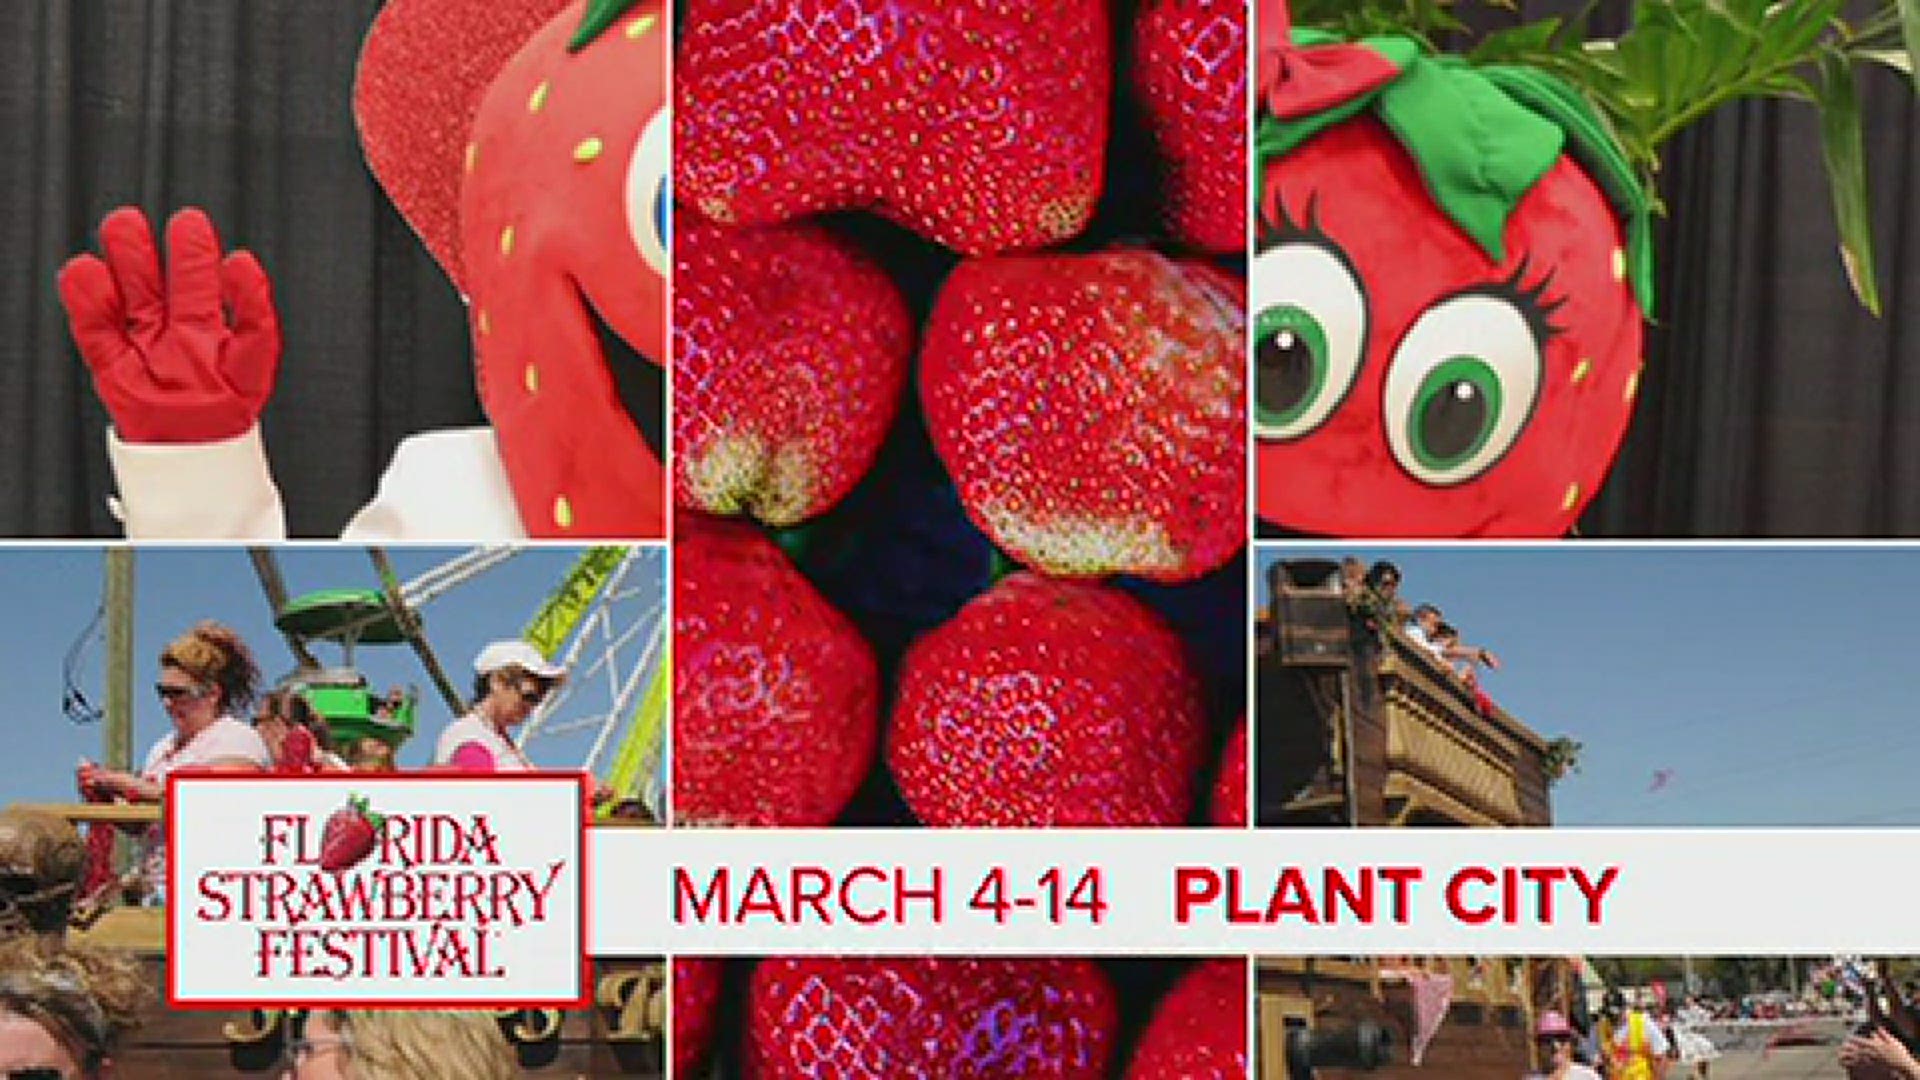 Five (5)  Prize Winners will each receive:  Four (4) general admission tickets to the 2021 Florida Strawberry Festival, March 4-14, 2021, at 303 Berryfest Place, Pla